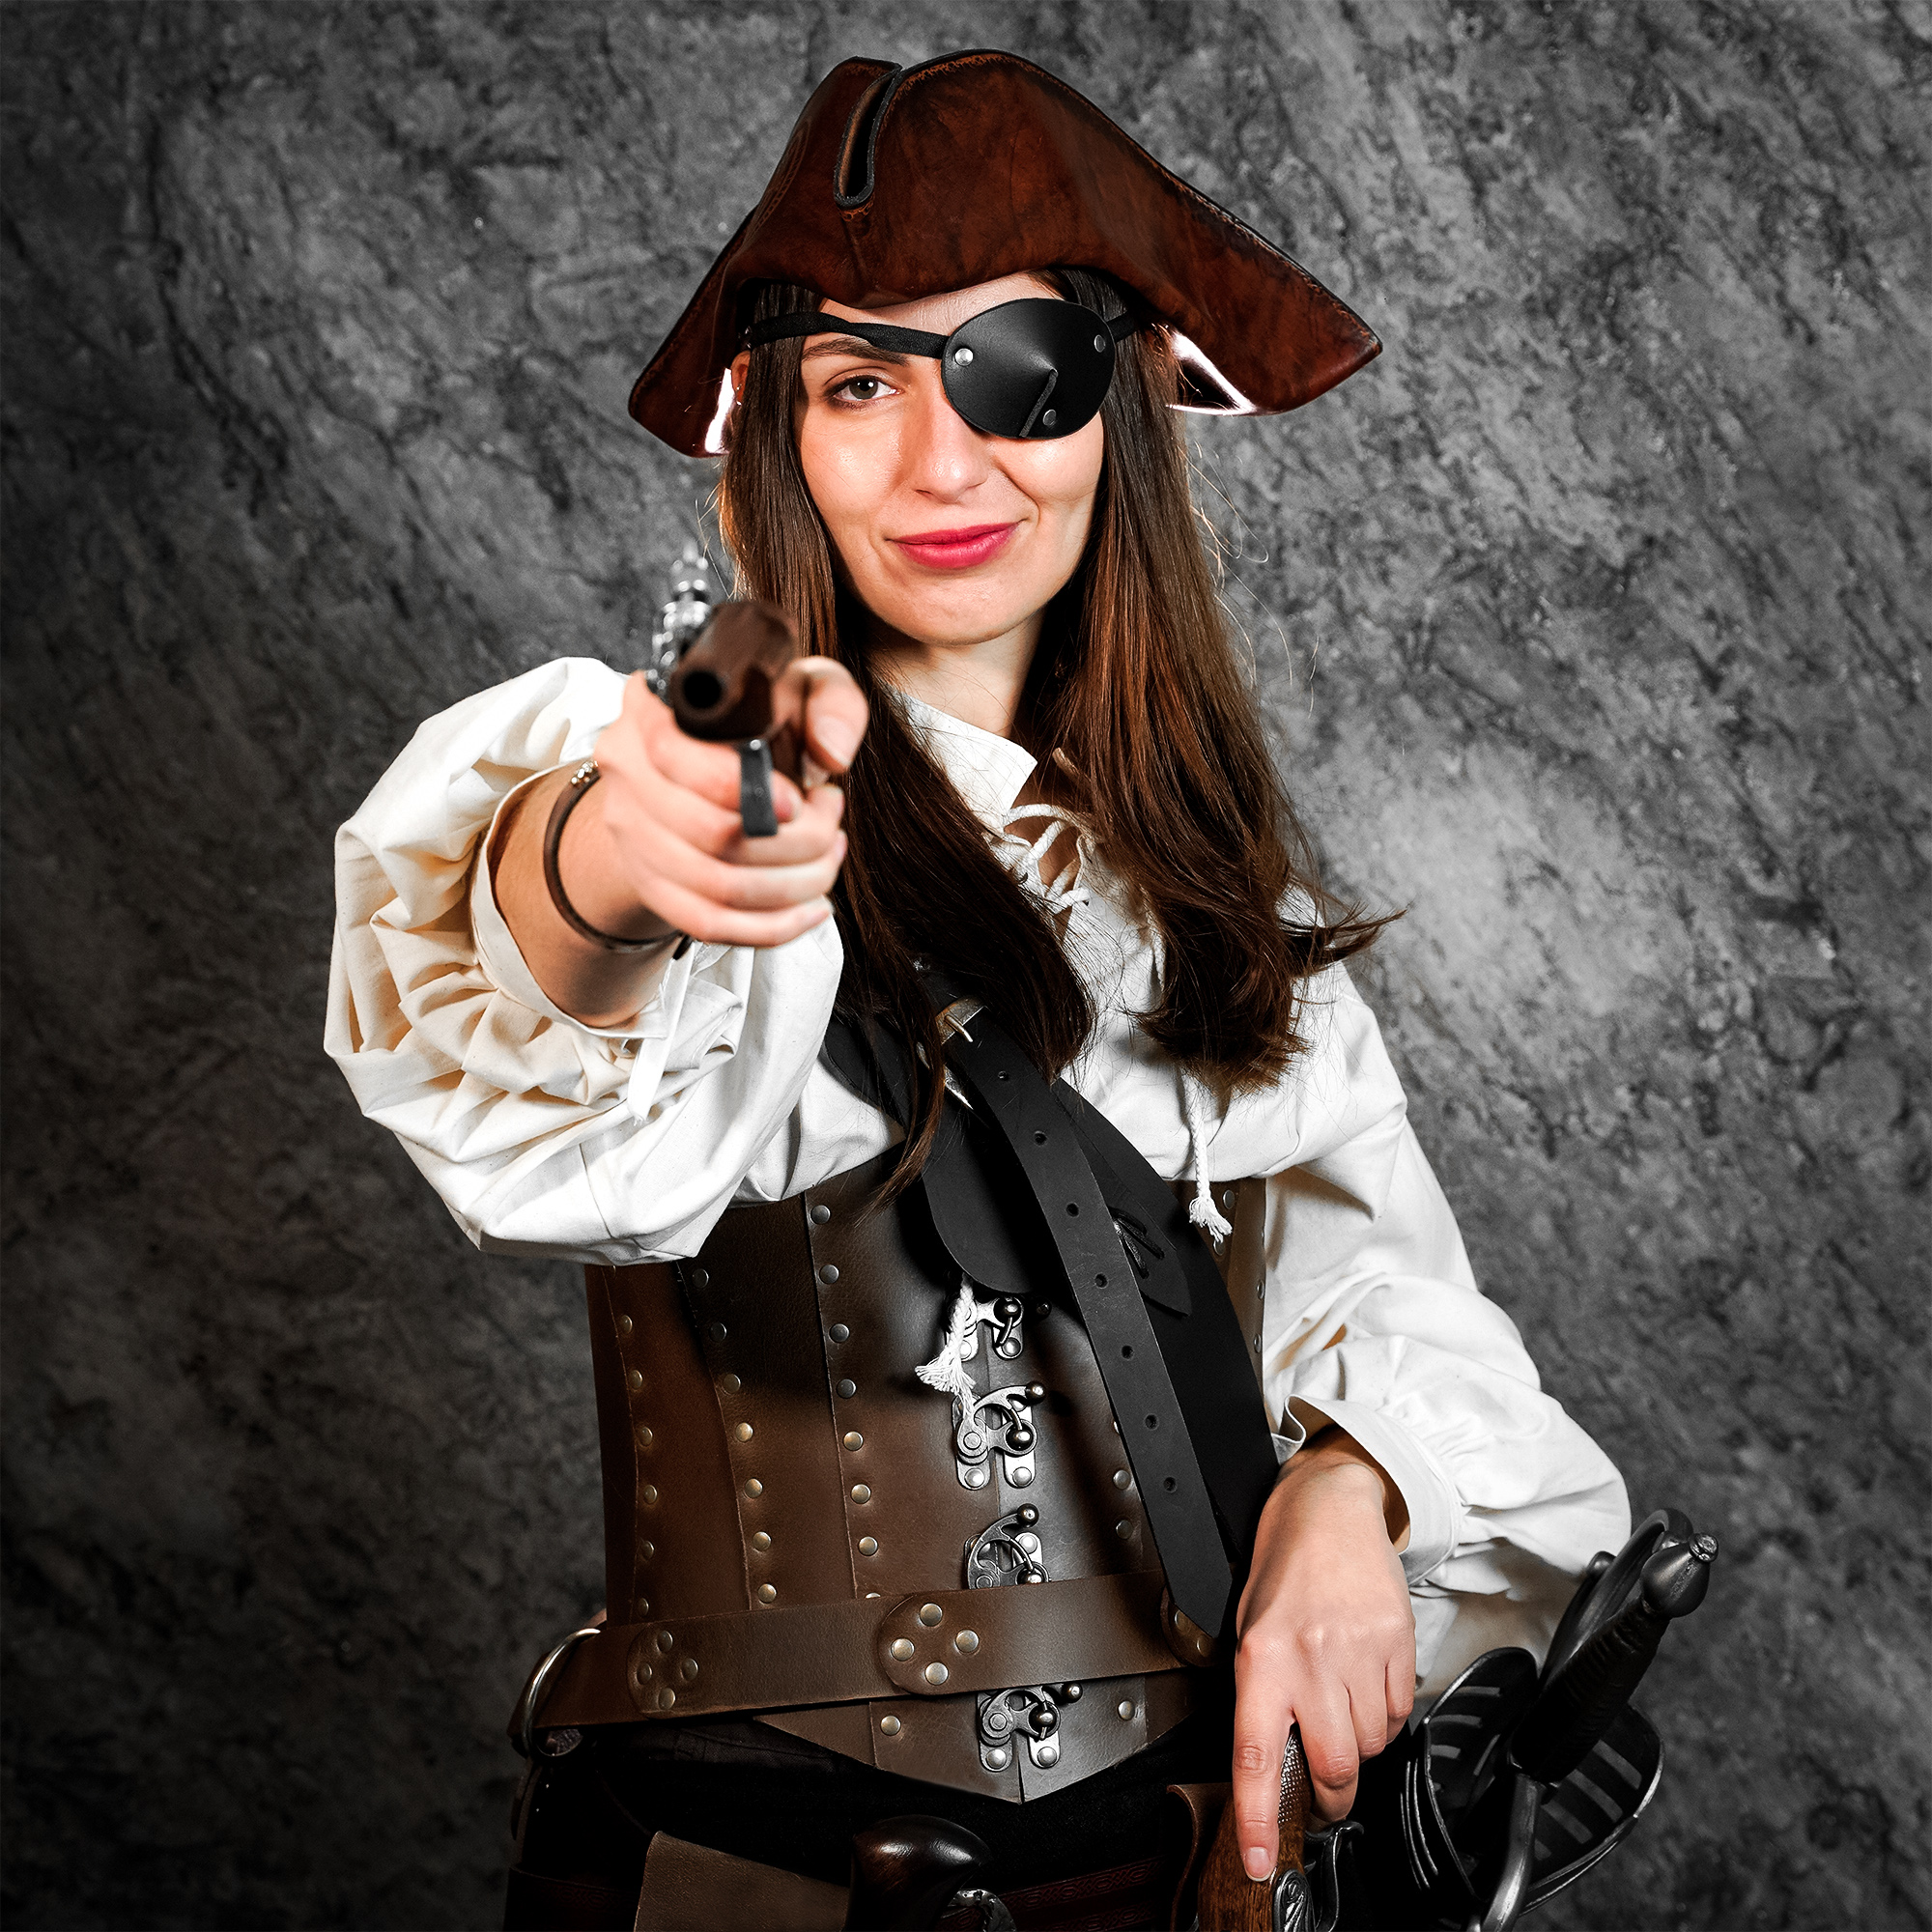 Leather Eye Patch // Steampunk Pirate Eye Patch // Cyberpunk Industrial  Wasteland Costume // Captain Leather Eye Patch Cosplay 